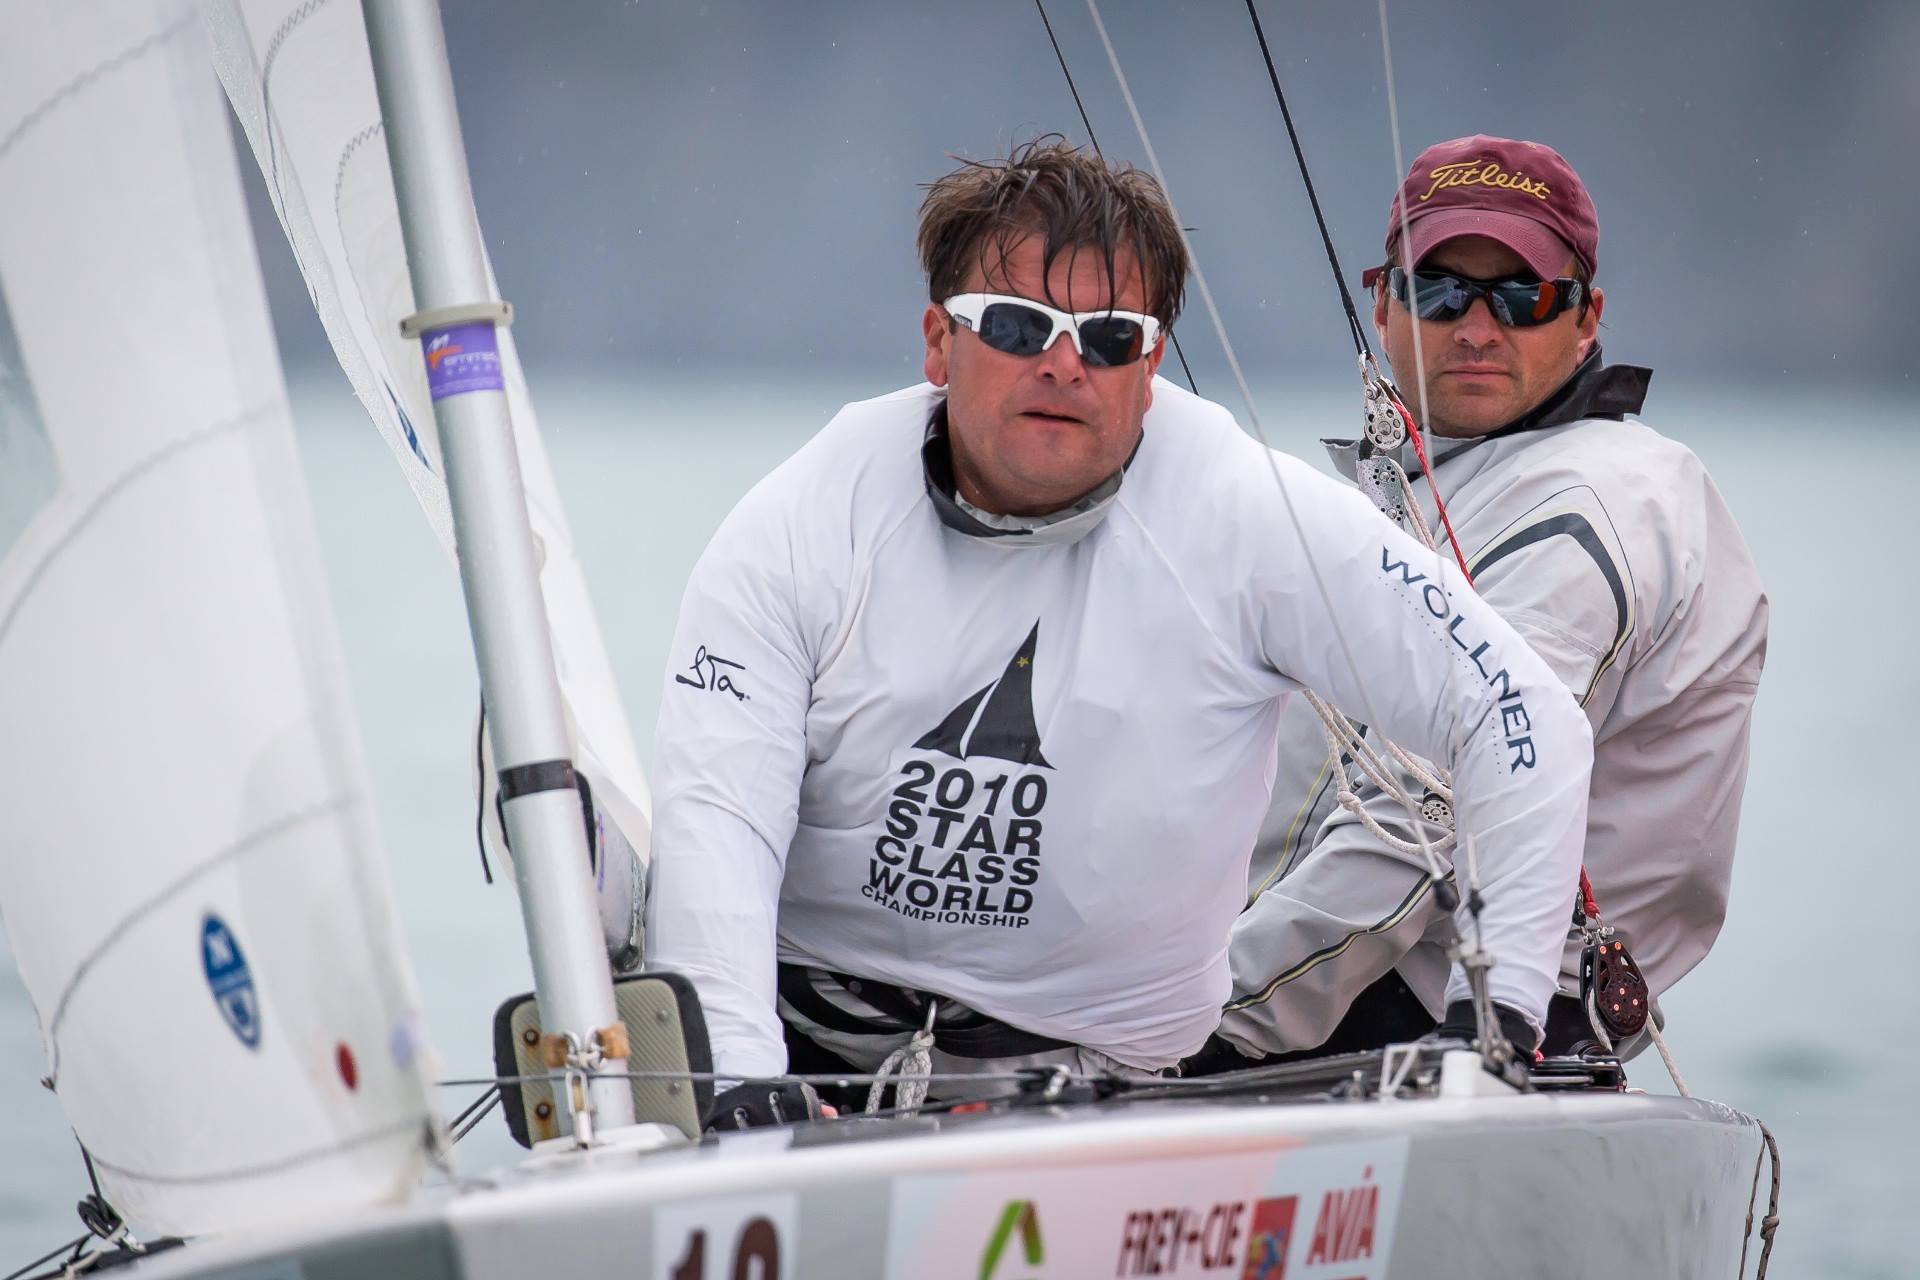  Star  9th District Championship/Rostige Kanne  Thunersee YC  Final results